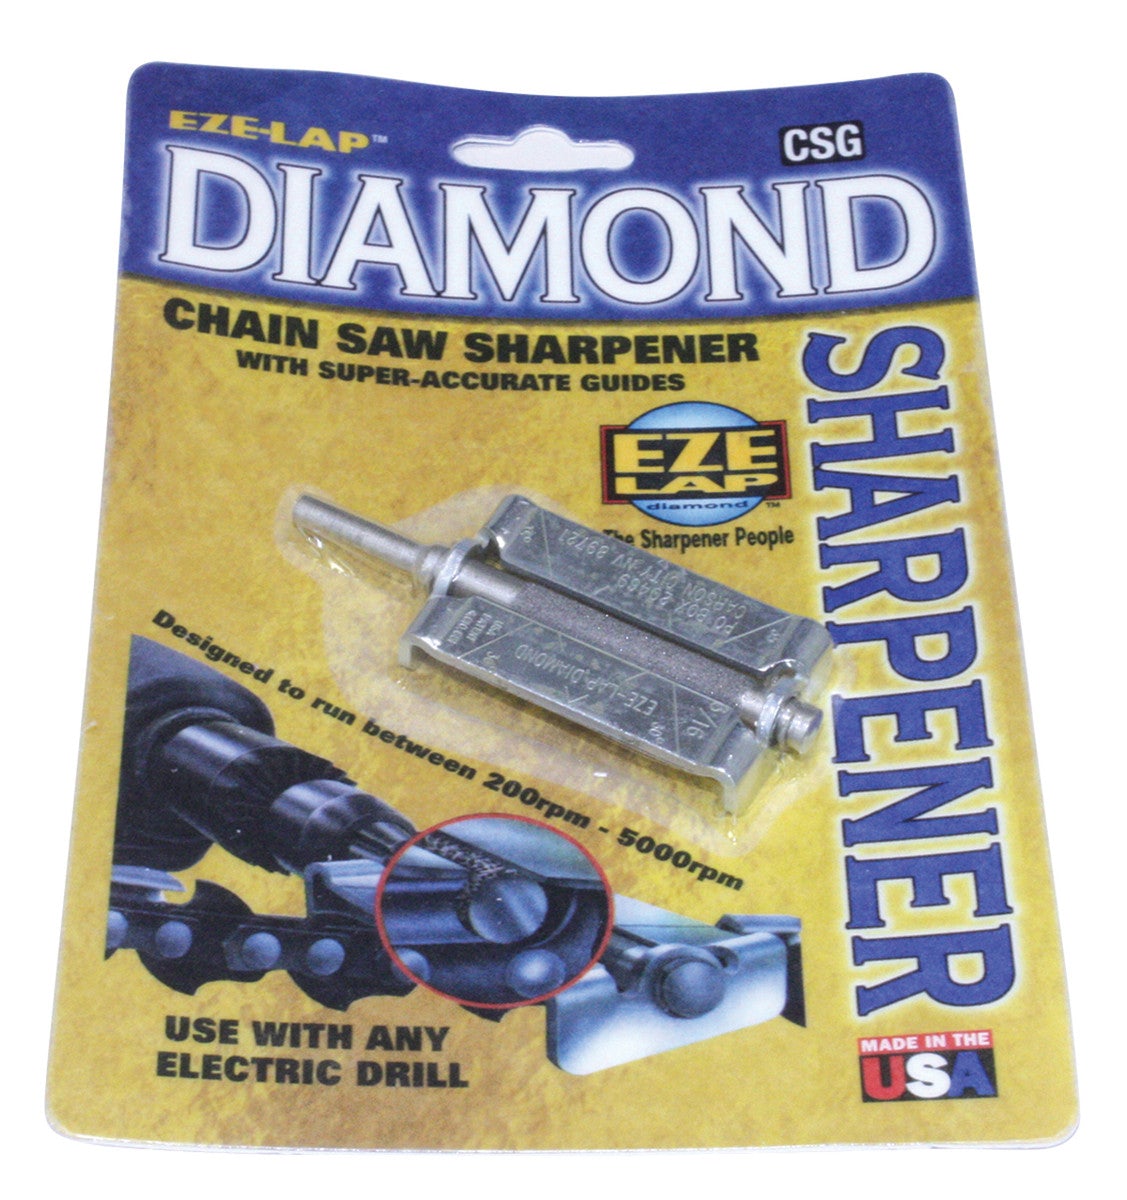 Eze-Lap Diamond Chainsaw Chain Sharpener - 3/16" - With Guide